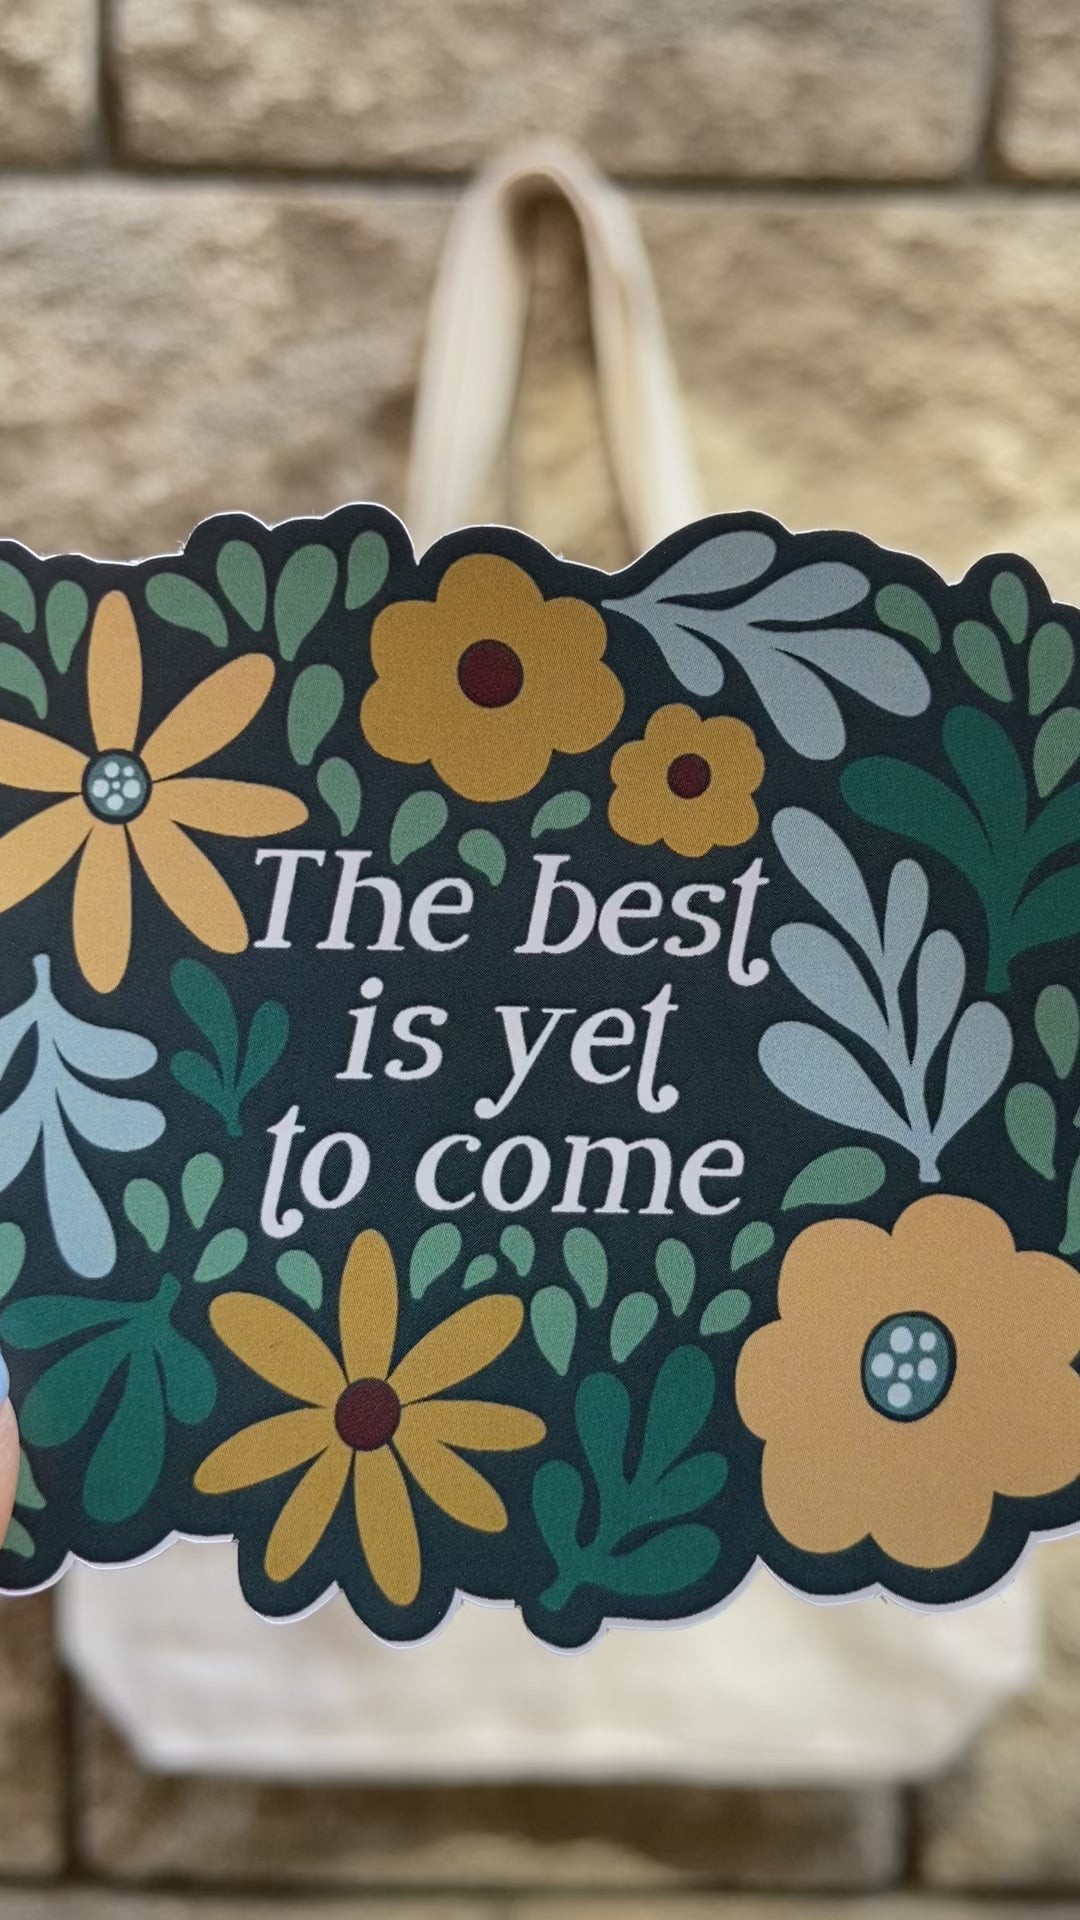 THE BEST IS YET TO COME STICKER